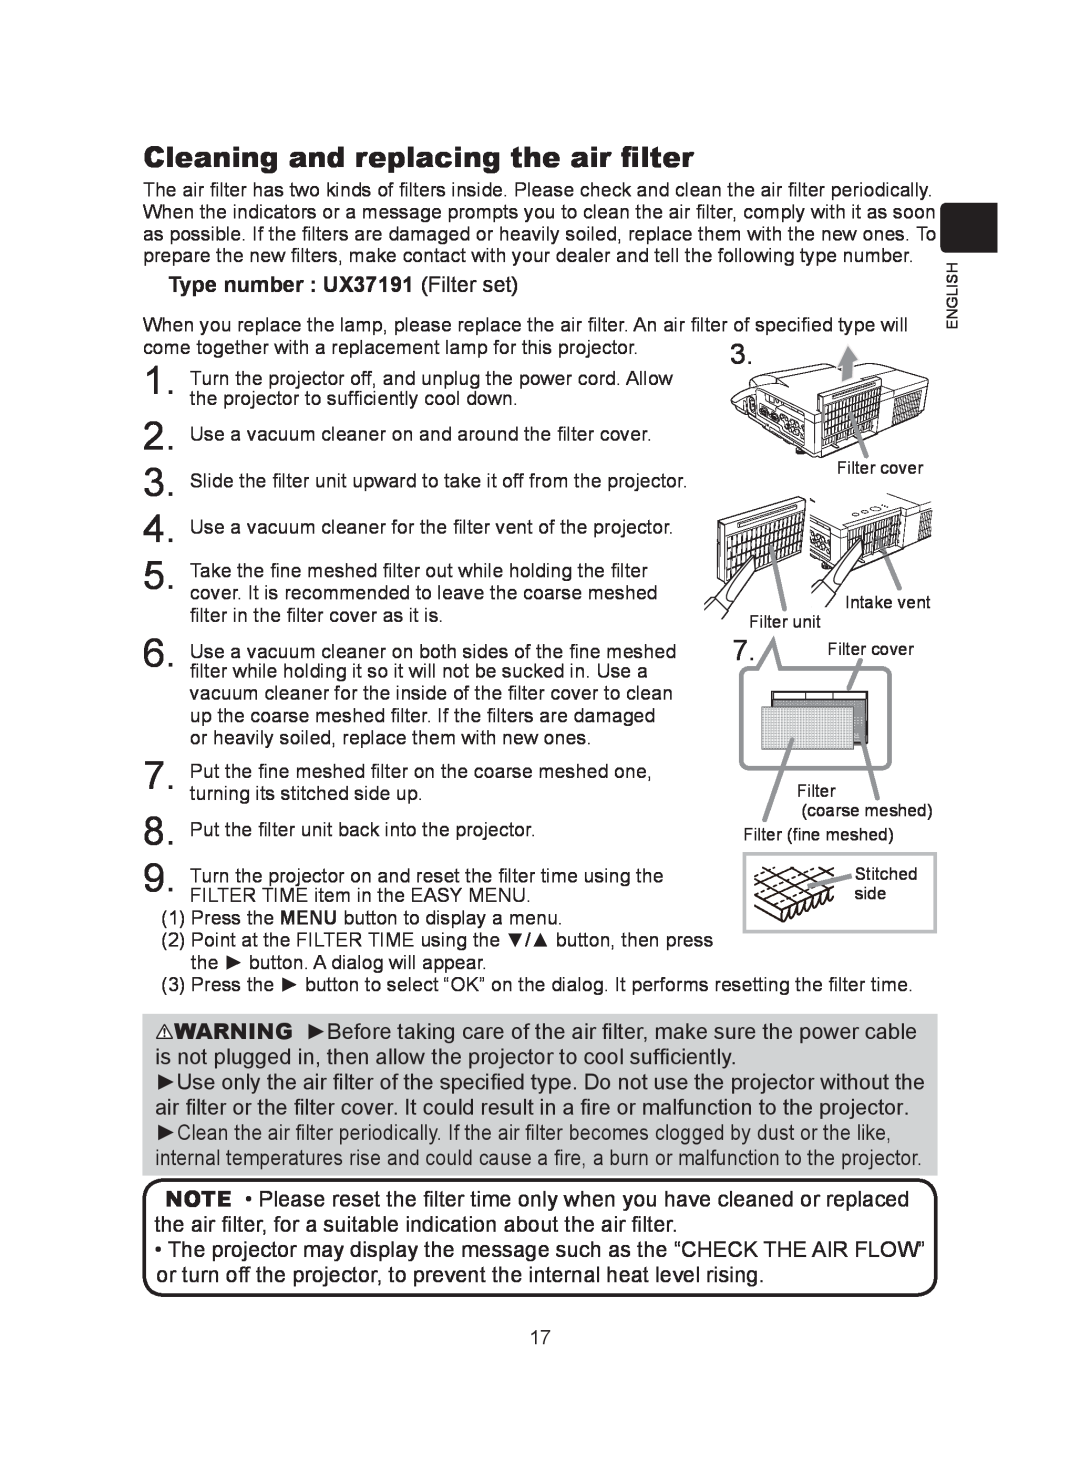 Dukane 8104HW user manual Cleaning and replacing the air filter, Type number UX37191 Filter set 